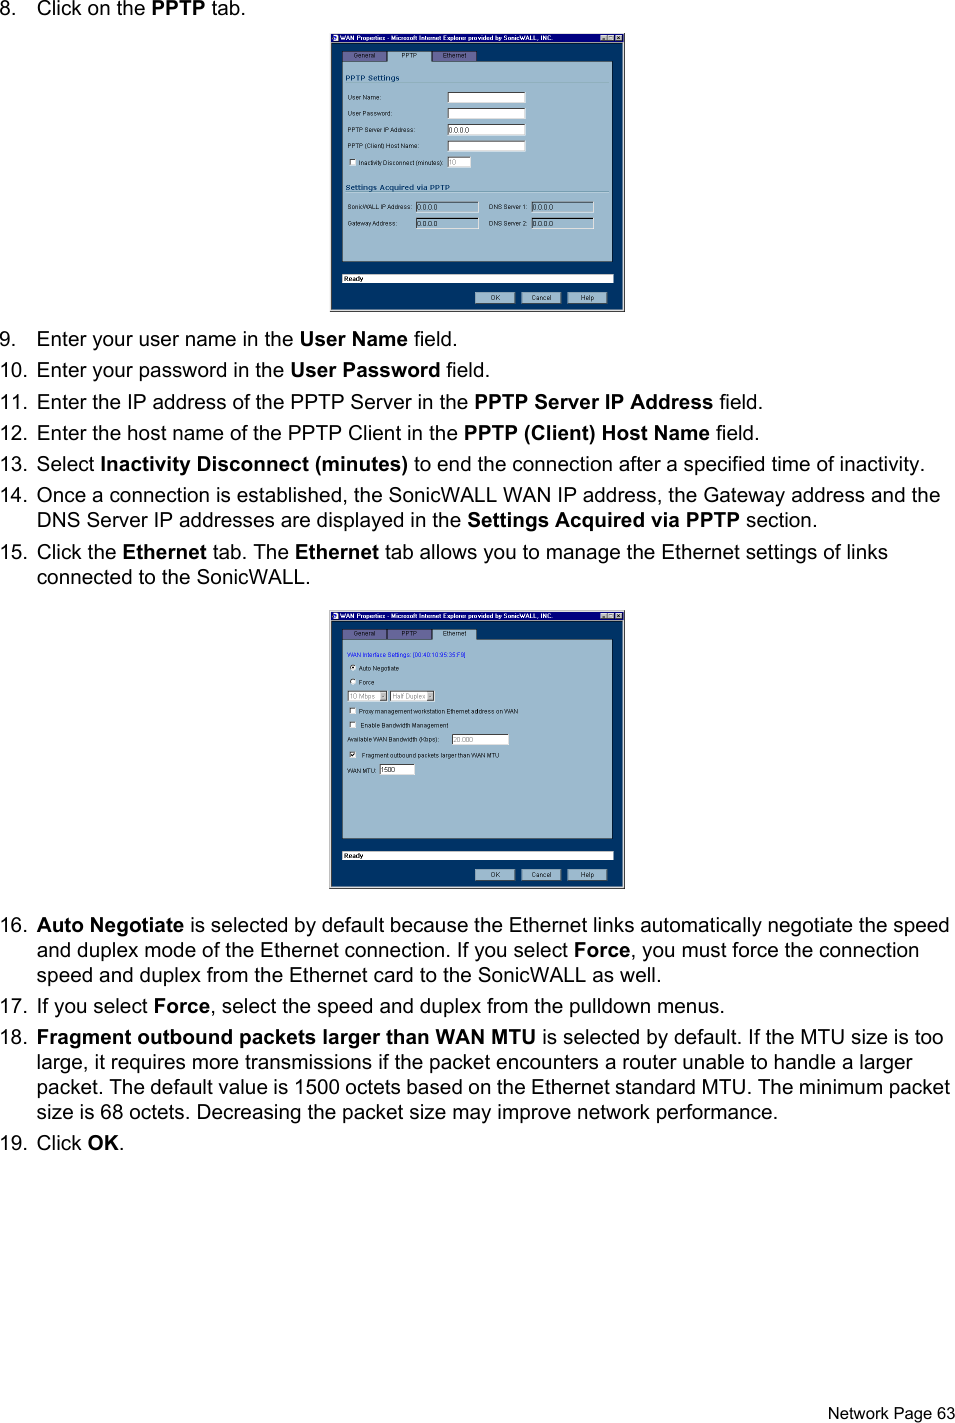  Network Page 638. Click on the PPTP tab.9. Enter your user name in the User Name field.10. Enter your password in the User Password field. 11. Enter the IP address of the PPTP Server in the PPTP Server IP Address field. 12. Enter the host name of the PPTP Client in the PPTP (Client) Host Name field. 13. Select Inactivity Disconnect (minutes) to end the connection after a specified time of inactivity. 14. Once a connection is established, the SonicWALL WAN IP address, the Gateway address and the DNS Server IP addresses are displayed in the Settings Acquired via PPTP section. 15. Click the Ethernet tab. The Ethernet tab allows you to manage the Ethernet settings of links connected to the SonicWALL. 16. Auto Negotiate is selected by default because the Ethernet links automatically negotiate the speed and duplex mode of the Ethernet connection. If you select Force, you must force the connection speed and duplex from the Ethernet card to the SonicWALL as well.17. If you select Force, select the speed and duplex from the pulldown menus. 18. Fragment outbound packets larger than WAN MTU is selected by default. If the MTU size is too large, it requires more transmissions if the packet encounters a router unable to handle a larger packet. The default value is 1500 octets based on the Ethernet standard MTU. The minimum packet size is 68 octets. Decreasing the packet size may improve network performance. 19. Click OK. 